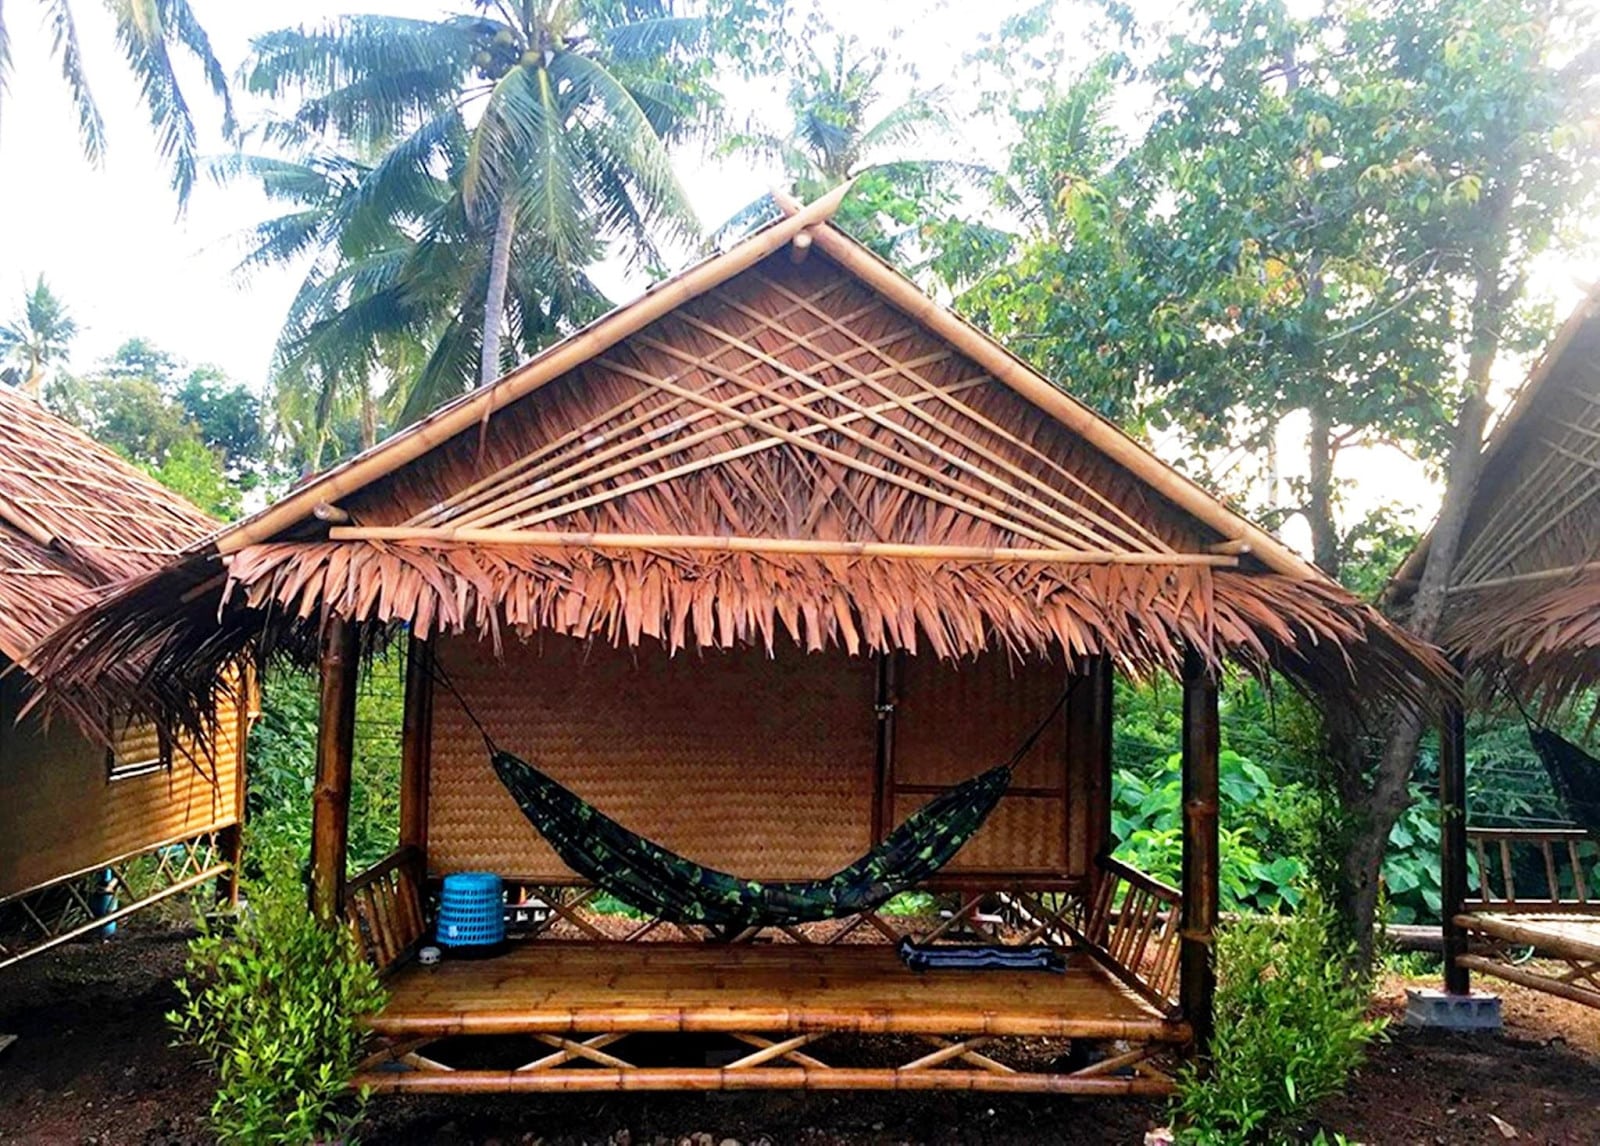 The Chawkoh Bungalow in Koh Lanta